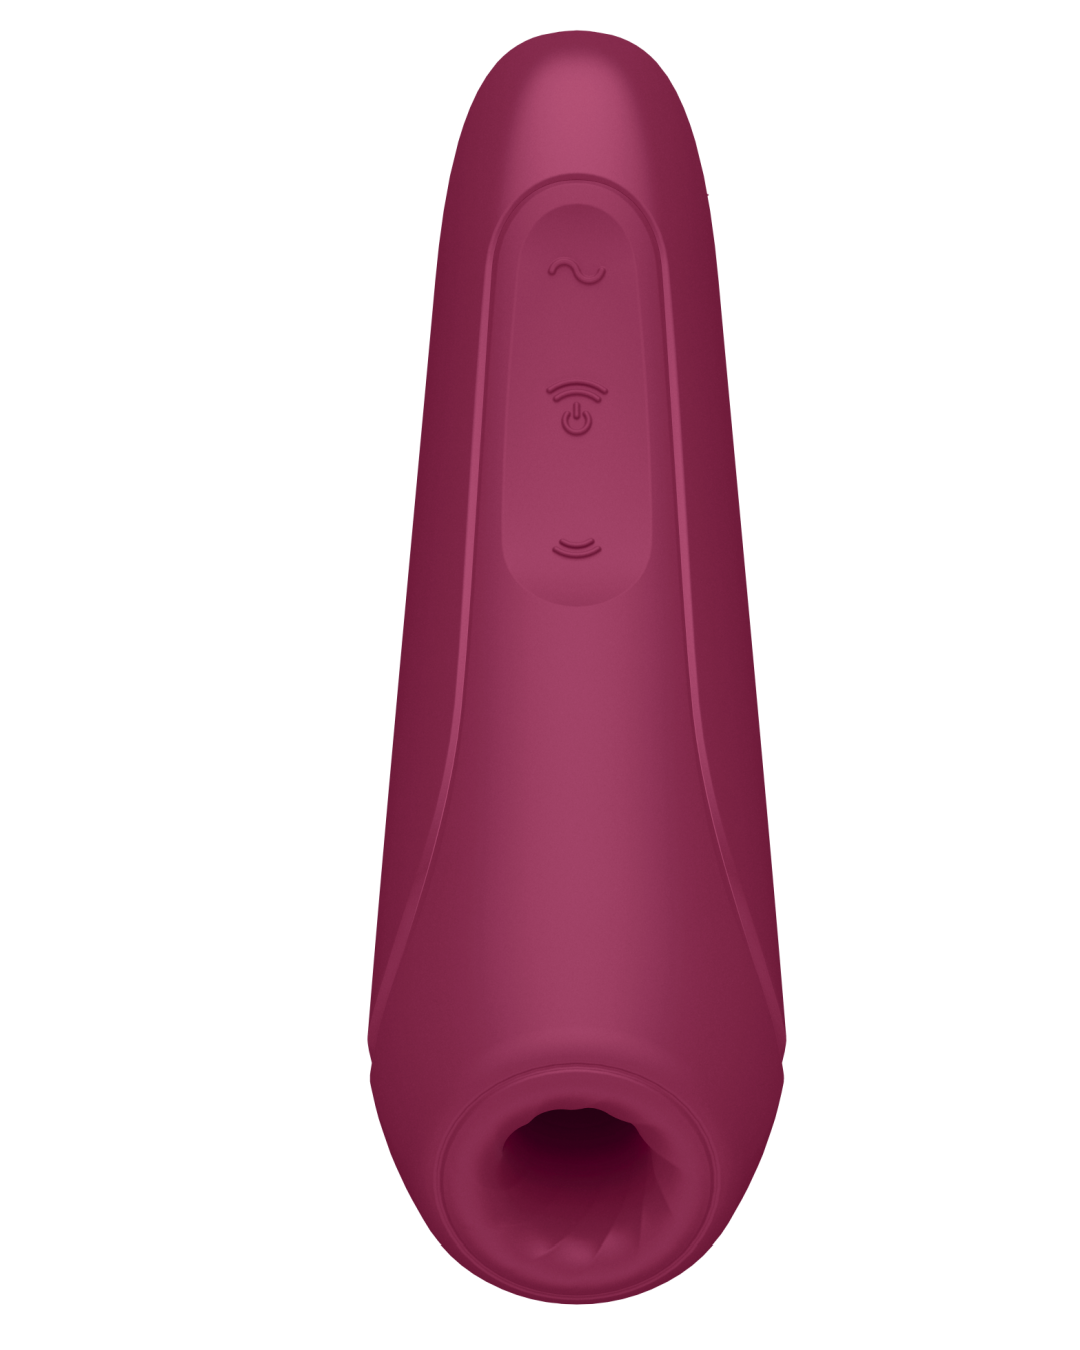 Satisfyer Curvy 1+ Pressure Wave + Vibration Stimulator - Dark Red face on showing the clitoral hole and buttons